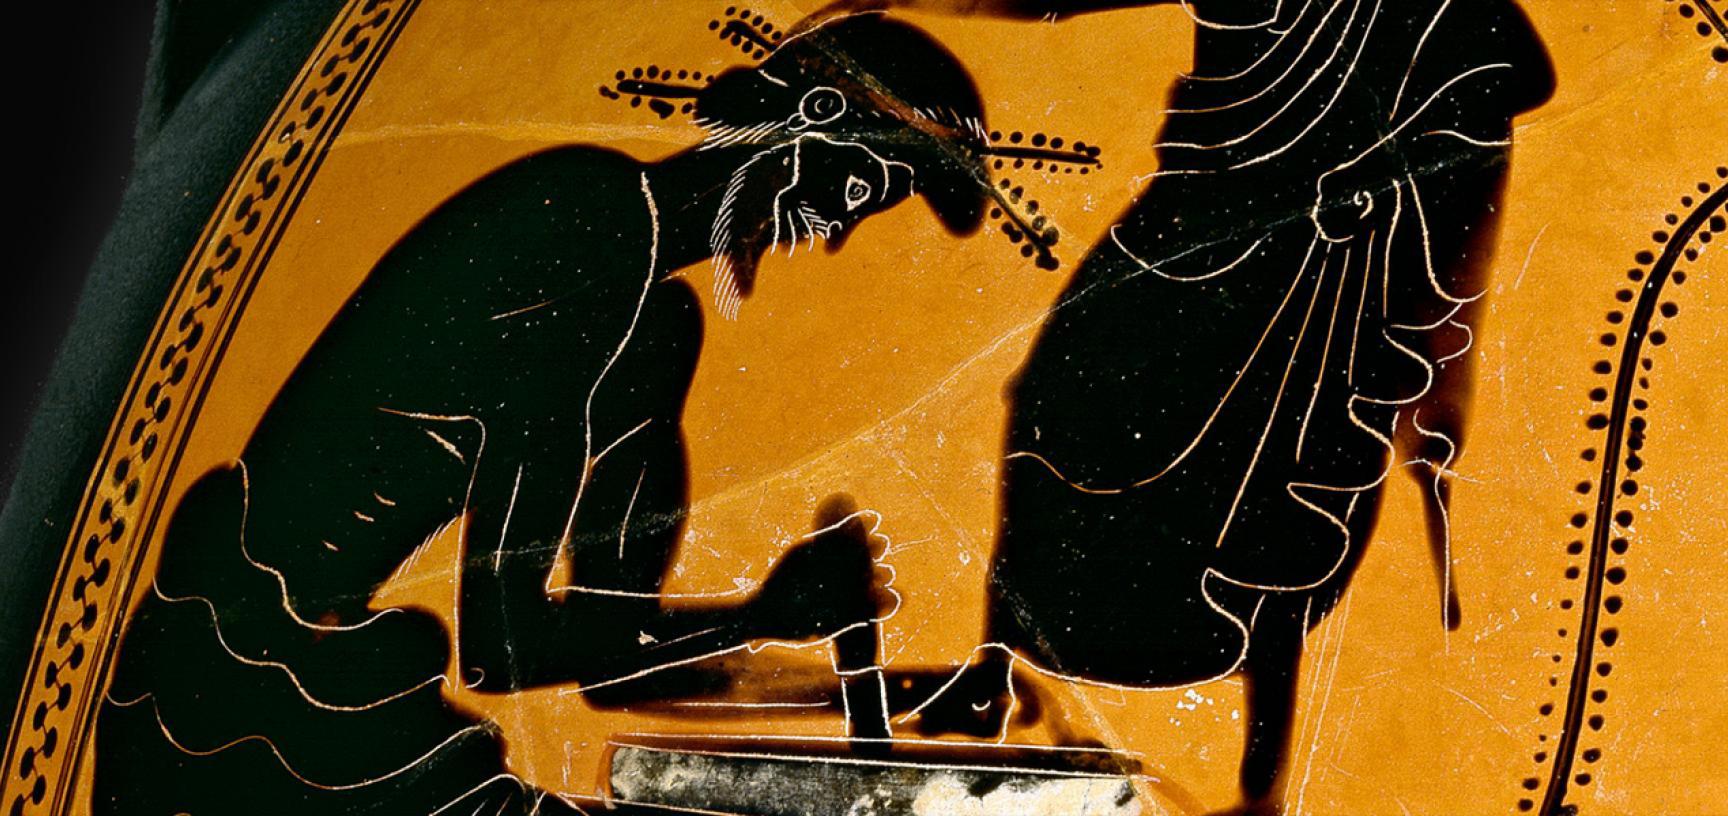 SHOEMAKER VASE (detail) from the Ashmolean collections